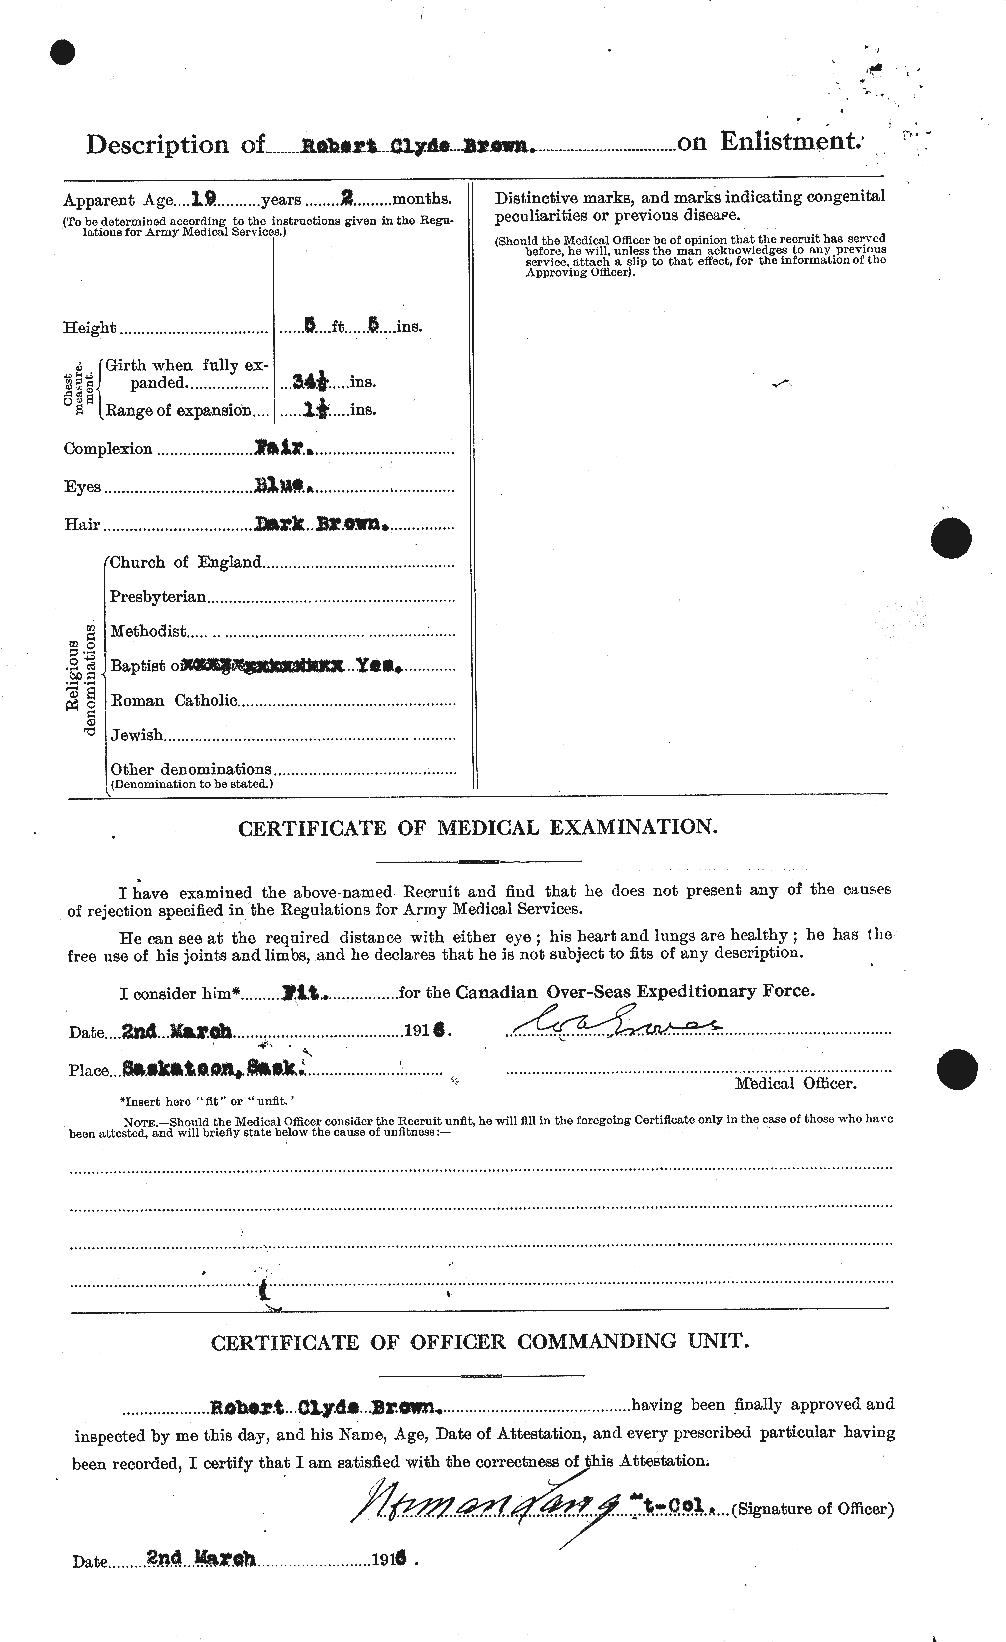 Personnel Records of the First World War - CEF 269909b